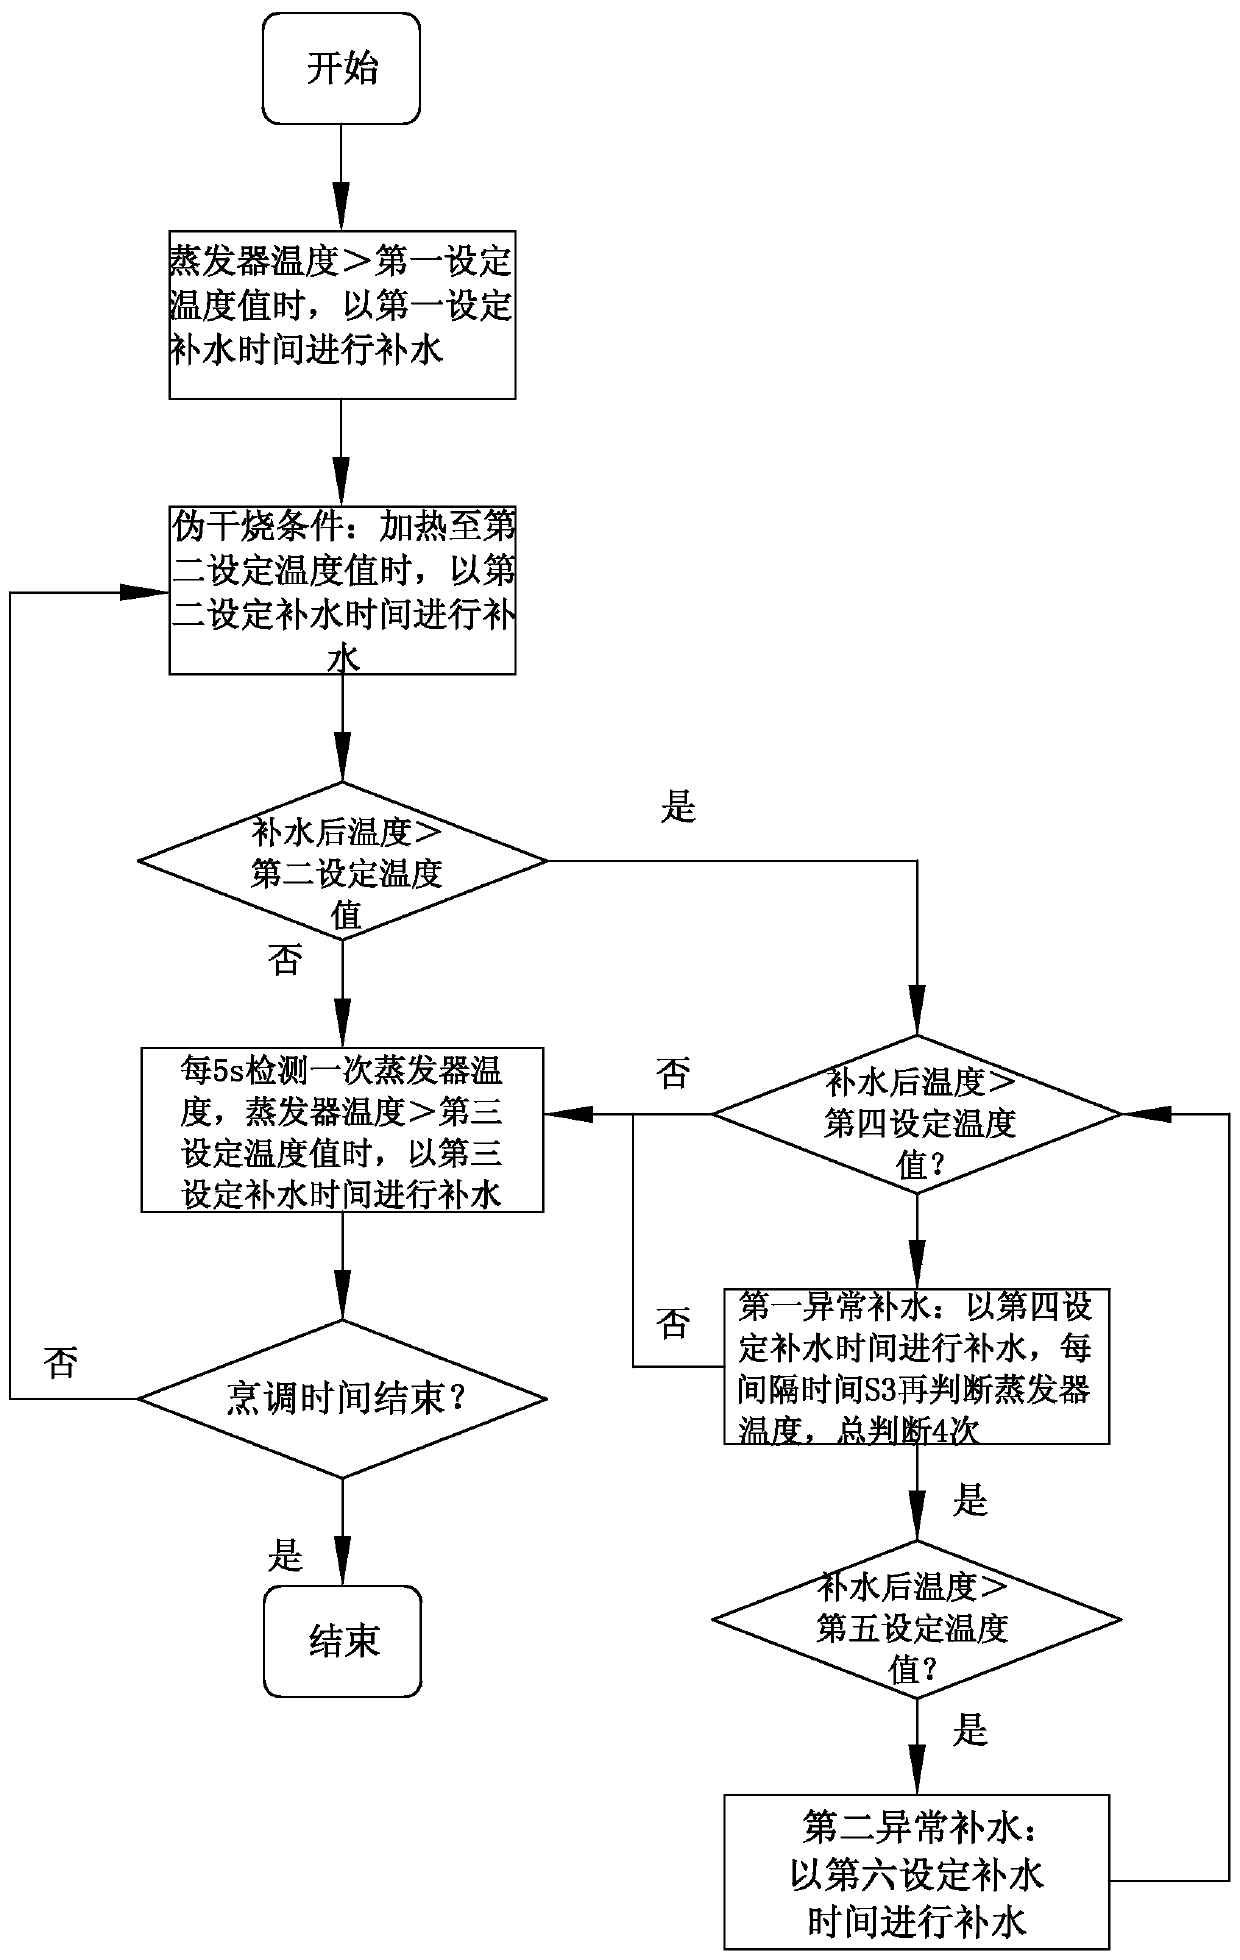 Steam generation device water quantity control method of cooking equipment